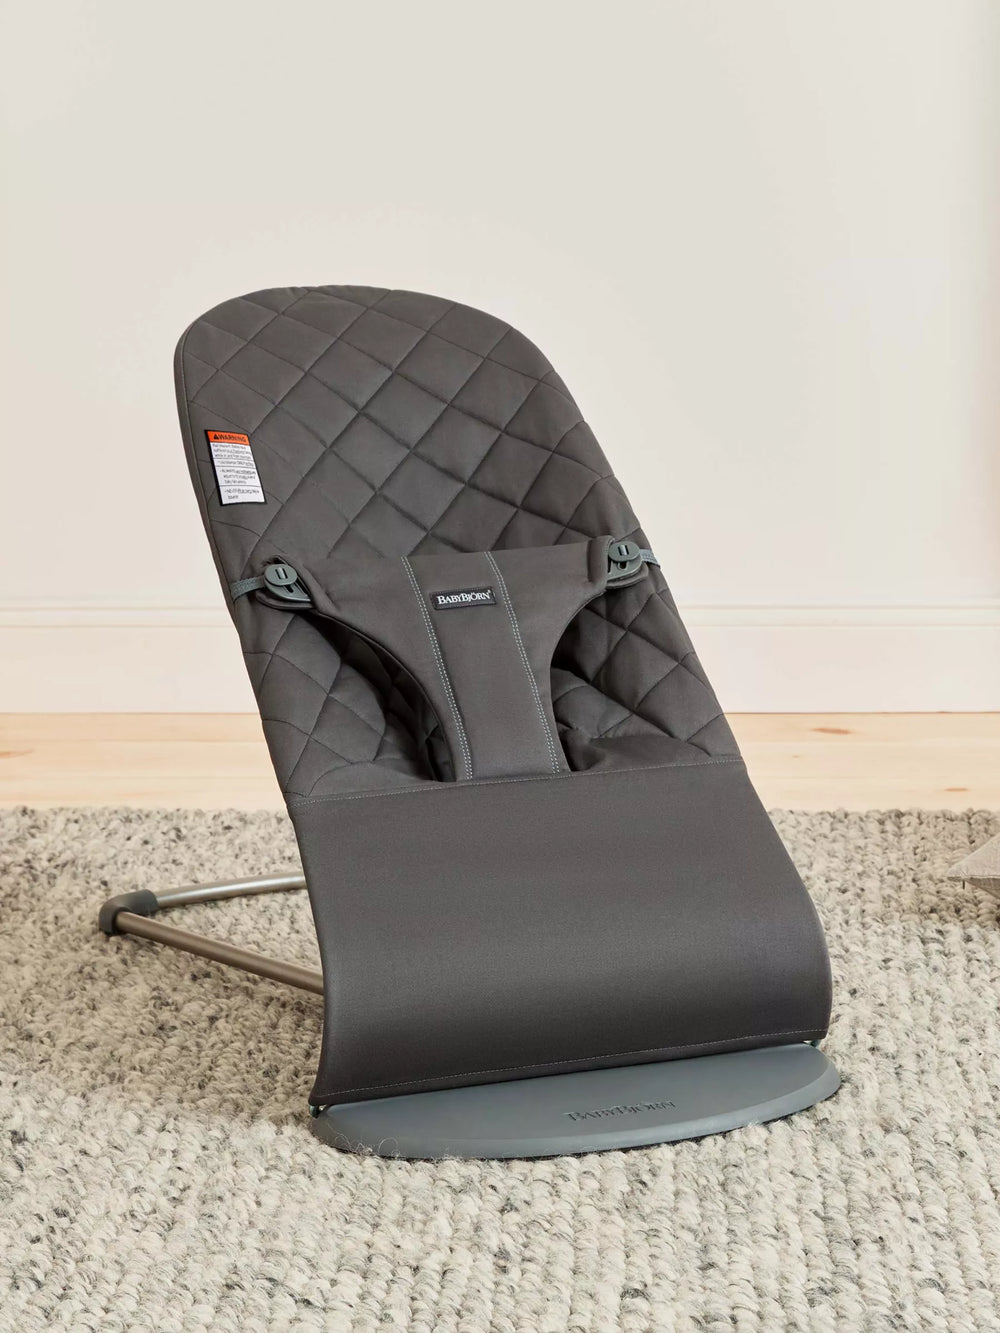 Baby Bjorn Bouncer Bliss Classic Quilt - Anthracite